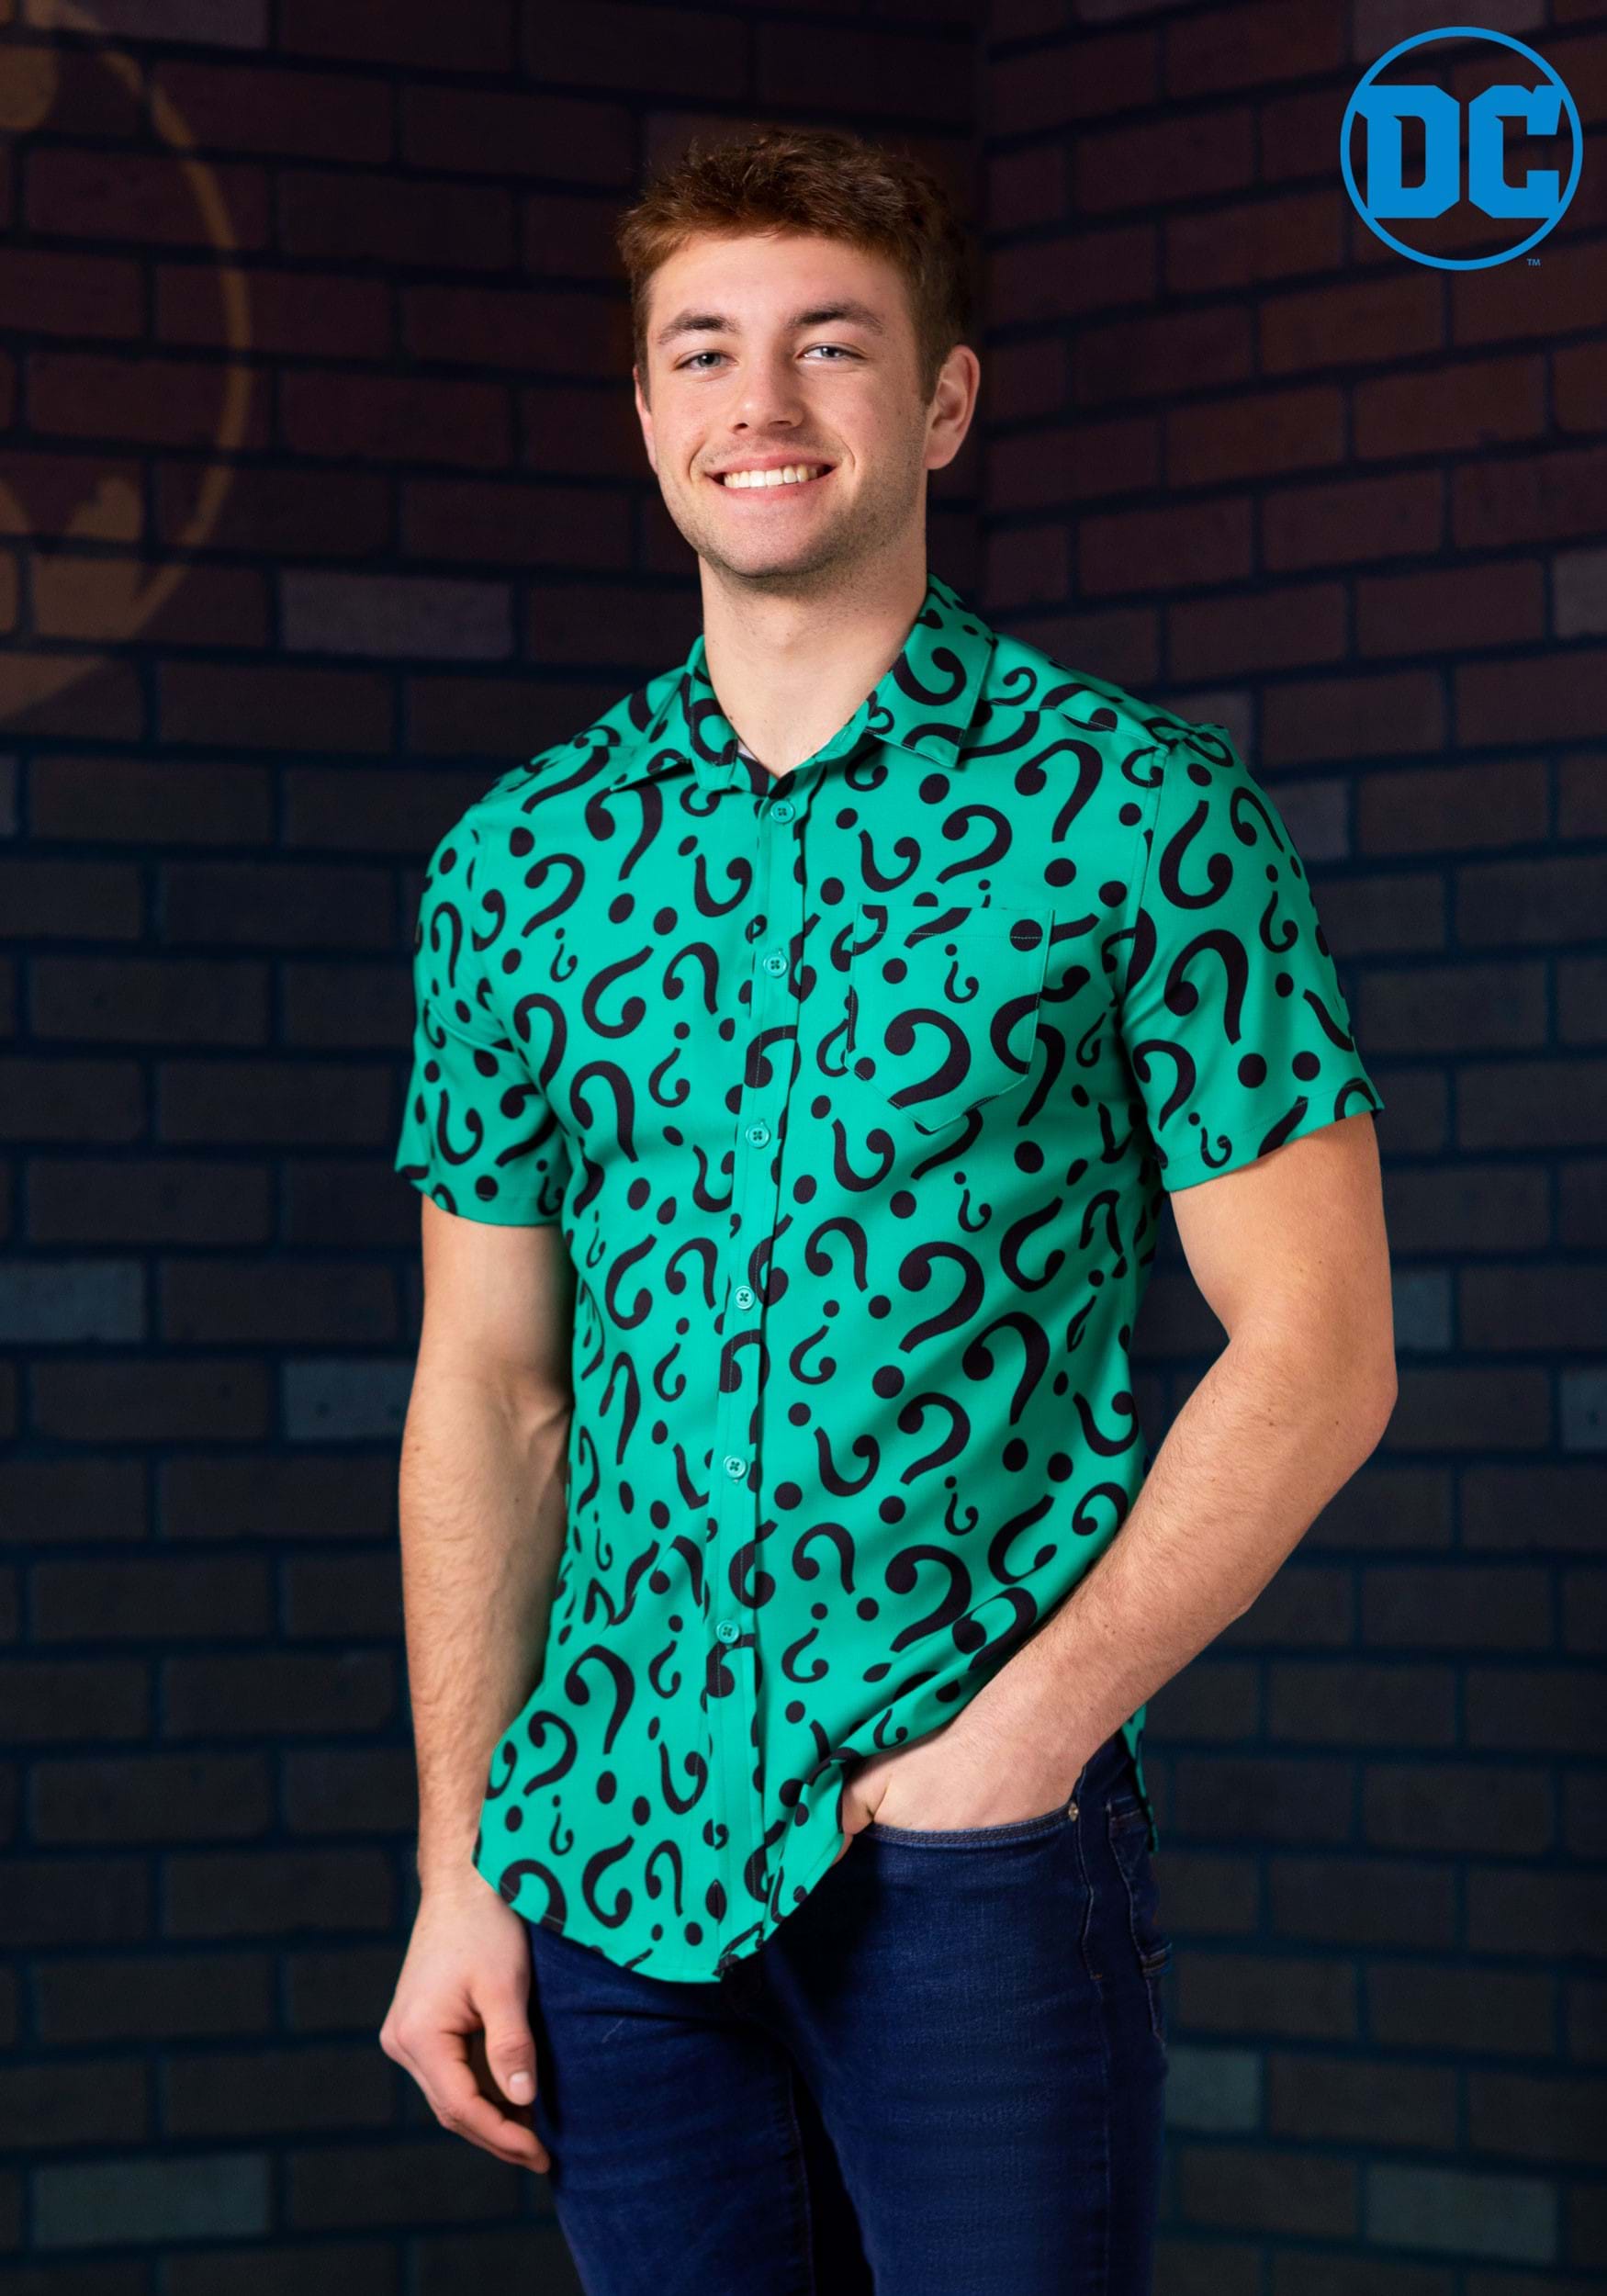 https://images.fun.com/products/80575/1-1/the-riddler-button-up-shirt.jpg